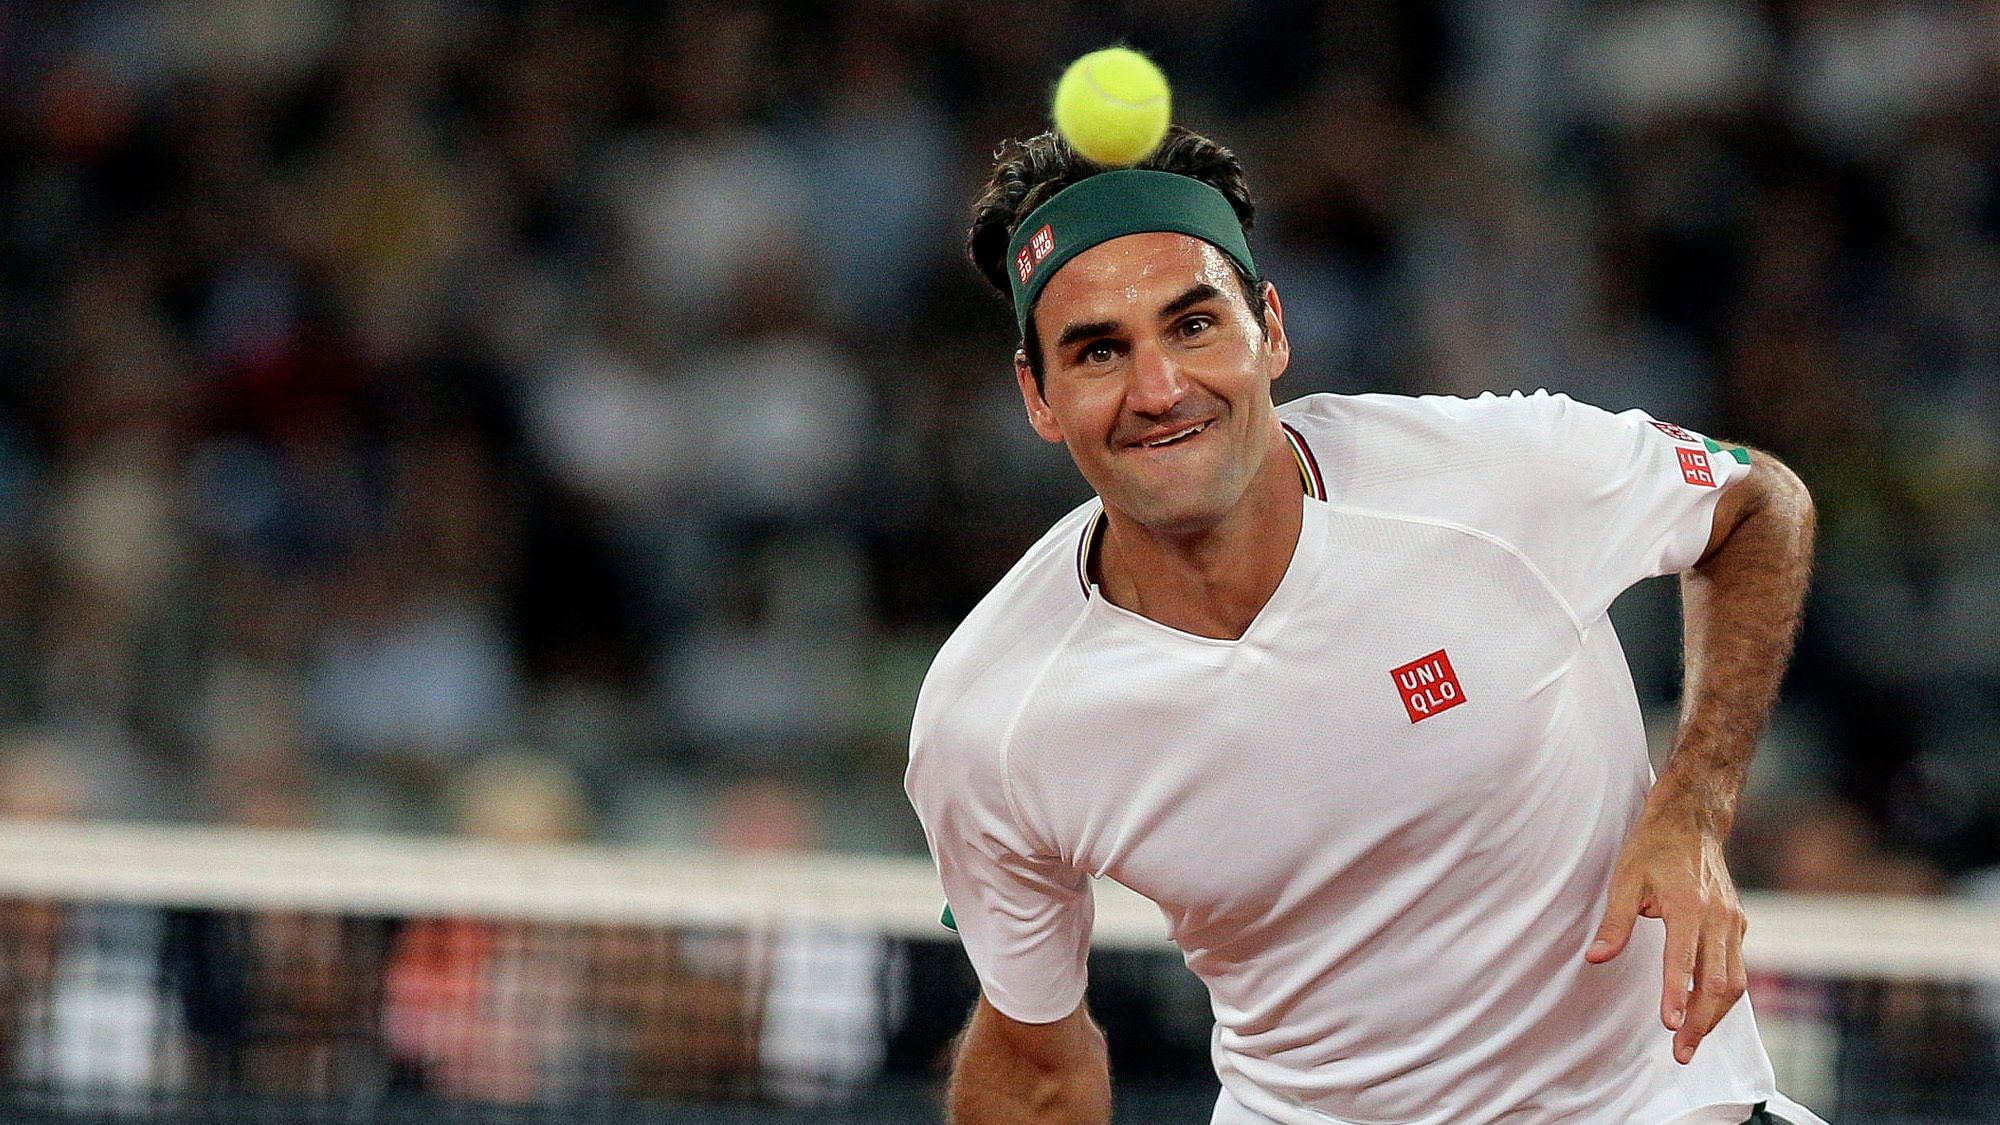 Roger Federer has had surgery on his right knee and will miss the French Open and several other tournaments.